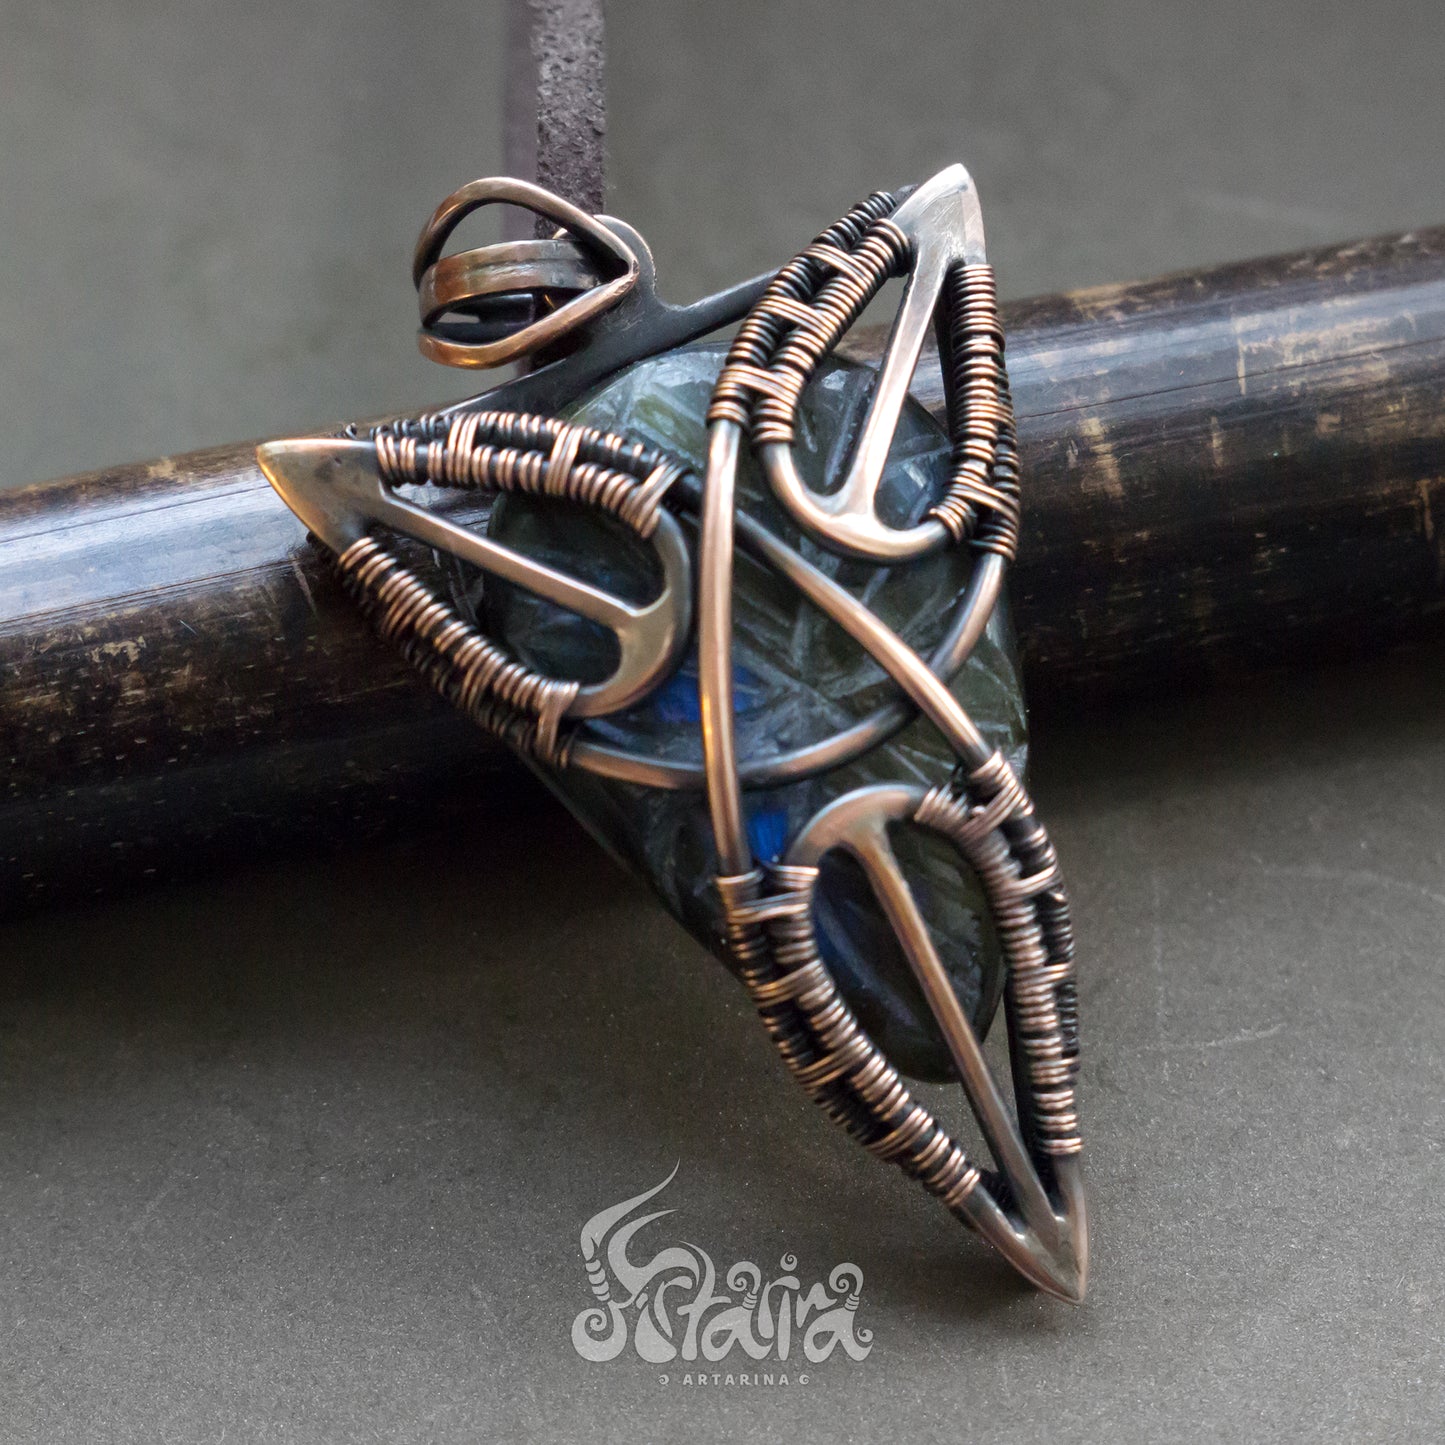 WIre wrapped triquetra pendant. Triangle wire wrap celtic viking symbolic design pendant amulet necklace Scandinavian symbols jewelry by Artarina vikings gods thor odin mens necklace